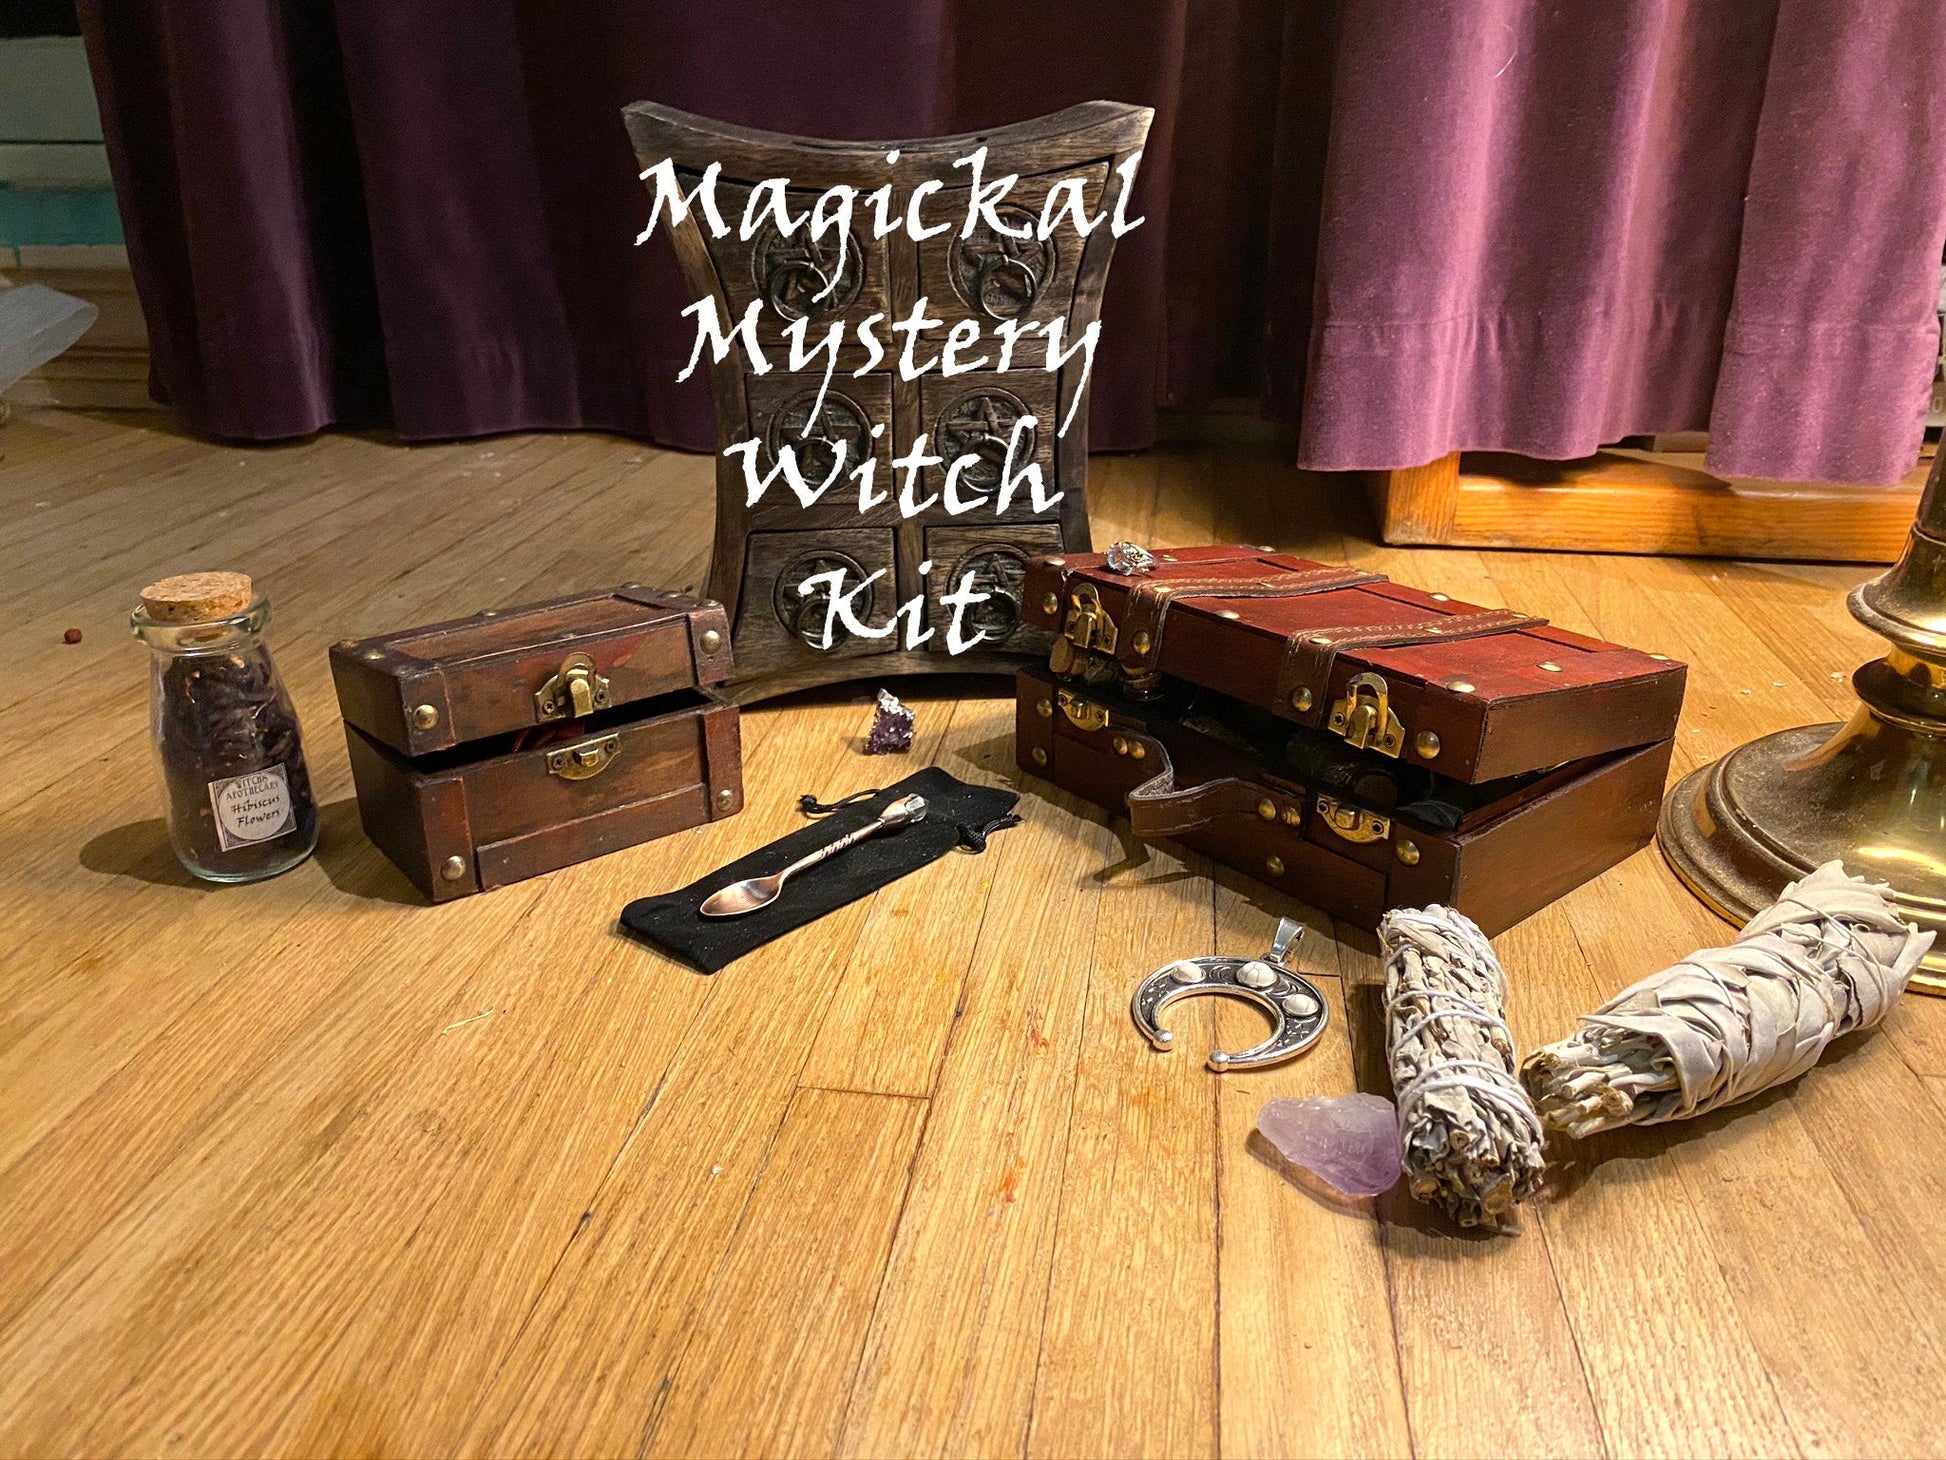 Magickal Mystery Witch Kit